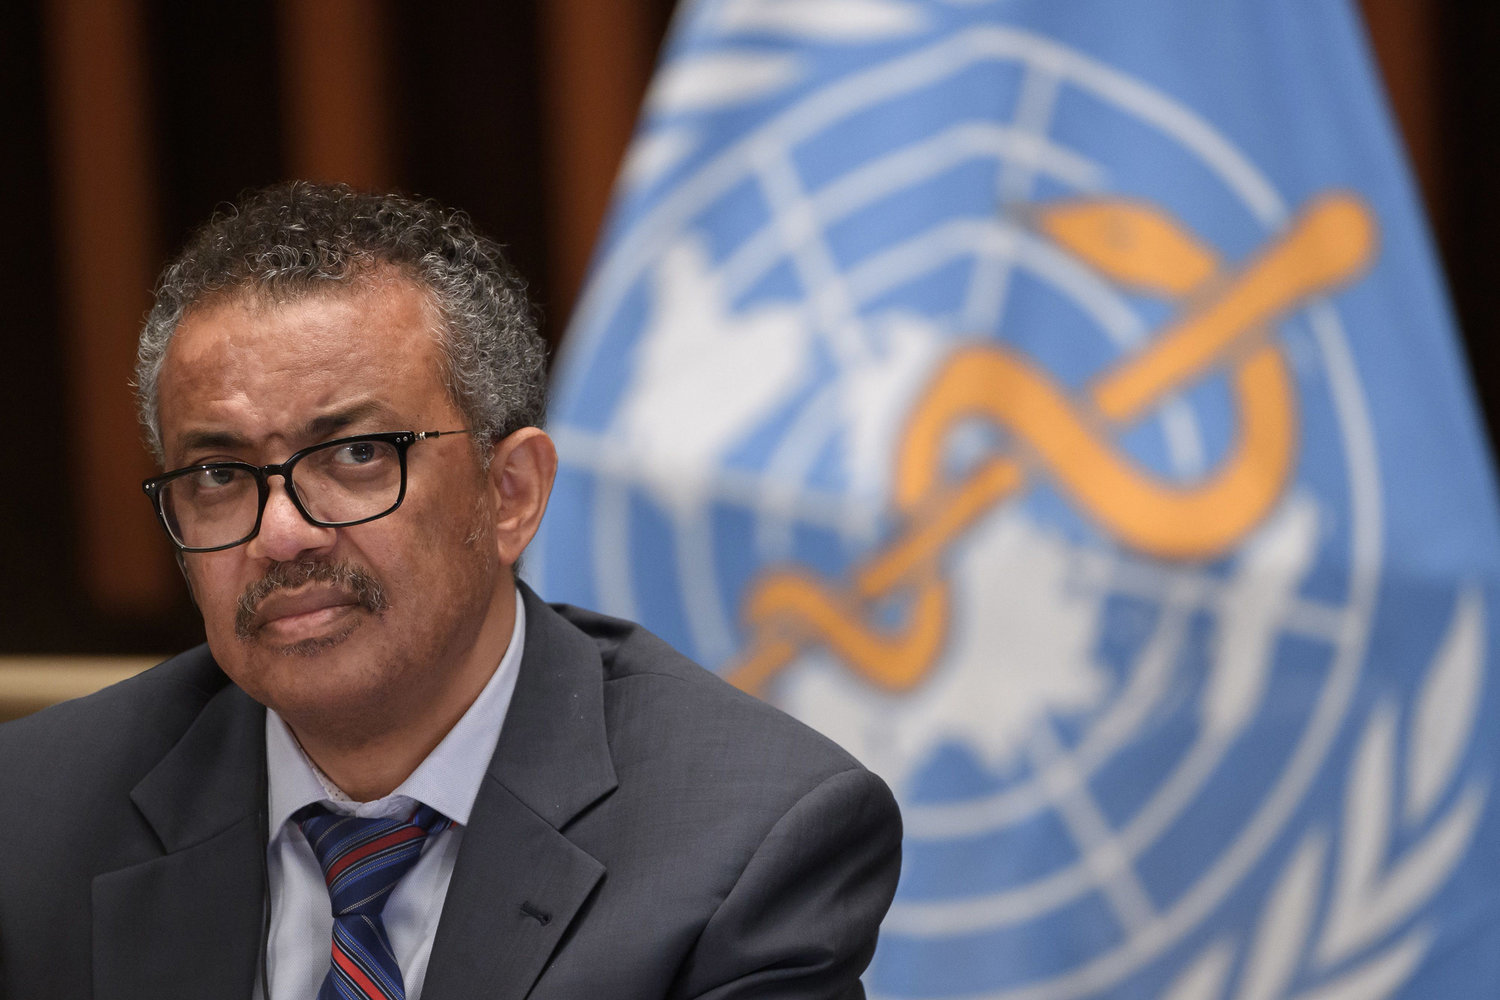 World Health Organization Director-General Tedros Adhanom Ghebreyesus pictured July 3, 2020, at the WHO headquarters in Geneva. (Fabrice Coffrini/AFP/Getty Images/TNS)